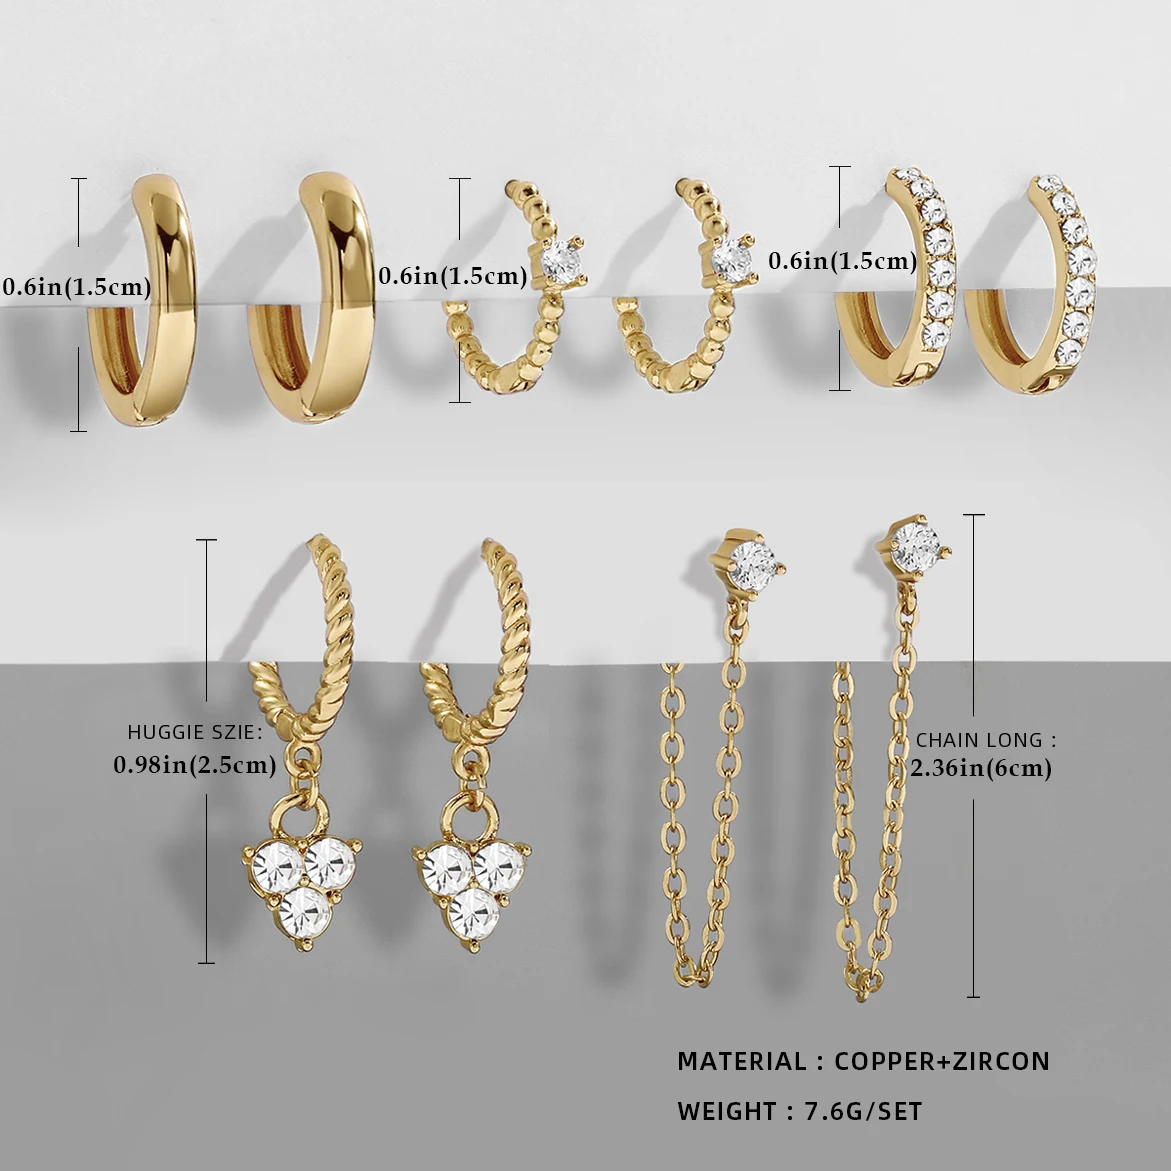 

New Design CZ Zircon Crystal Small Hoops Sets Long Gold Chain Earrings for Women Twist Beads Huggie Fashion Jewelry Brincos 2021